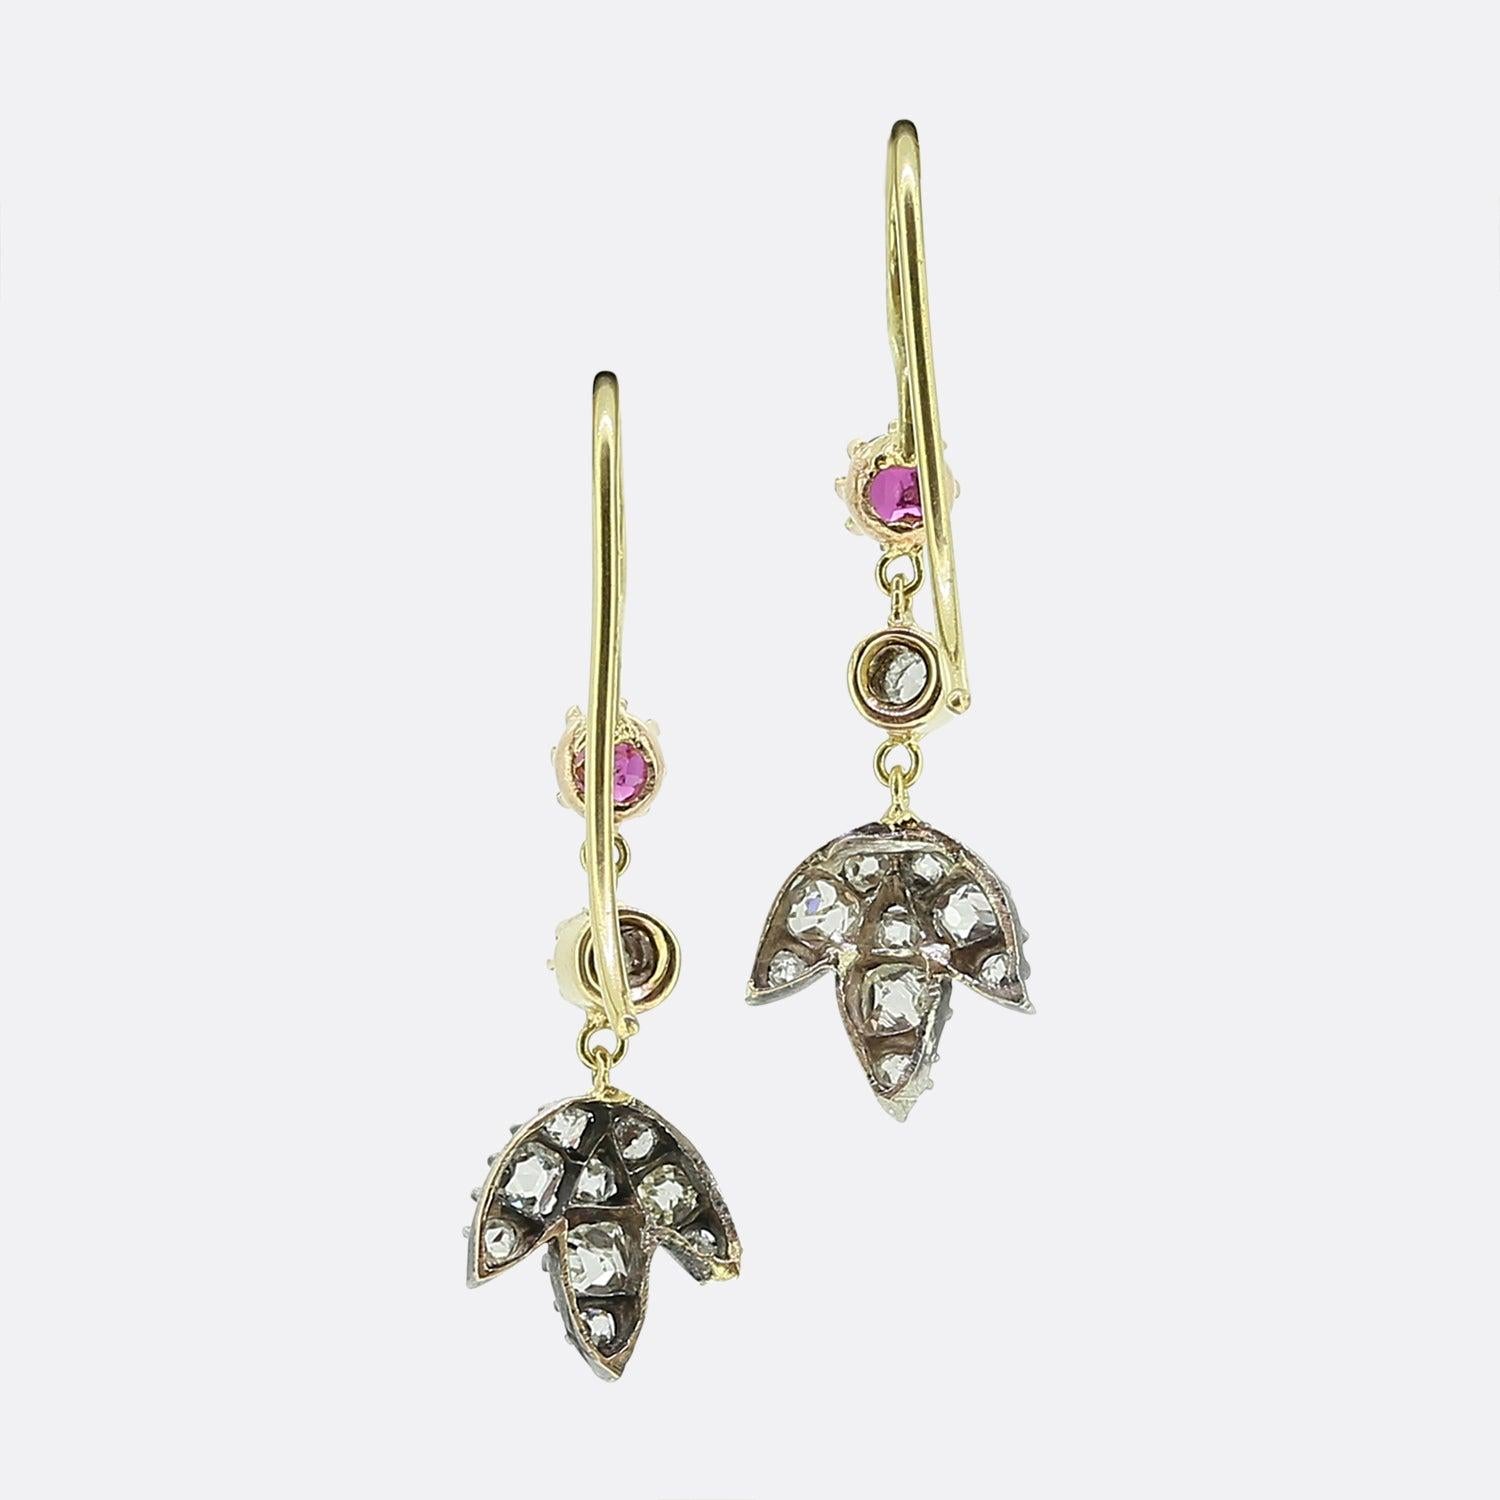 Here we have a recently remodelled pair of Victorian style drop earrings. Each piece has crafted from 18ct yellow gold with the hooked wire playing host to single pink ruby and a single old cut diamond. Both earrings are finished with a charming